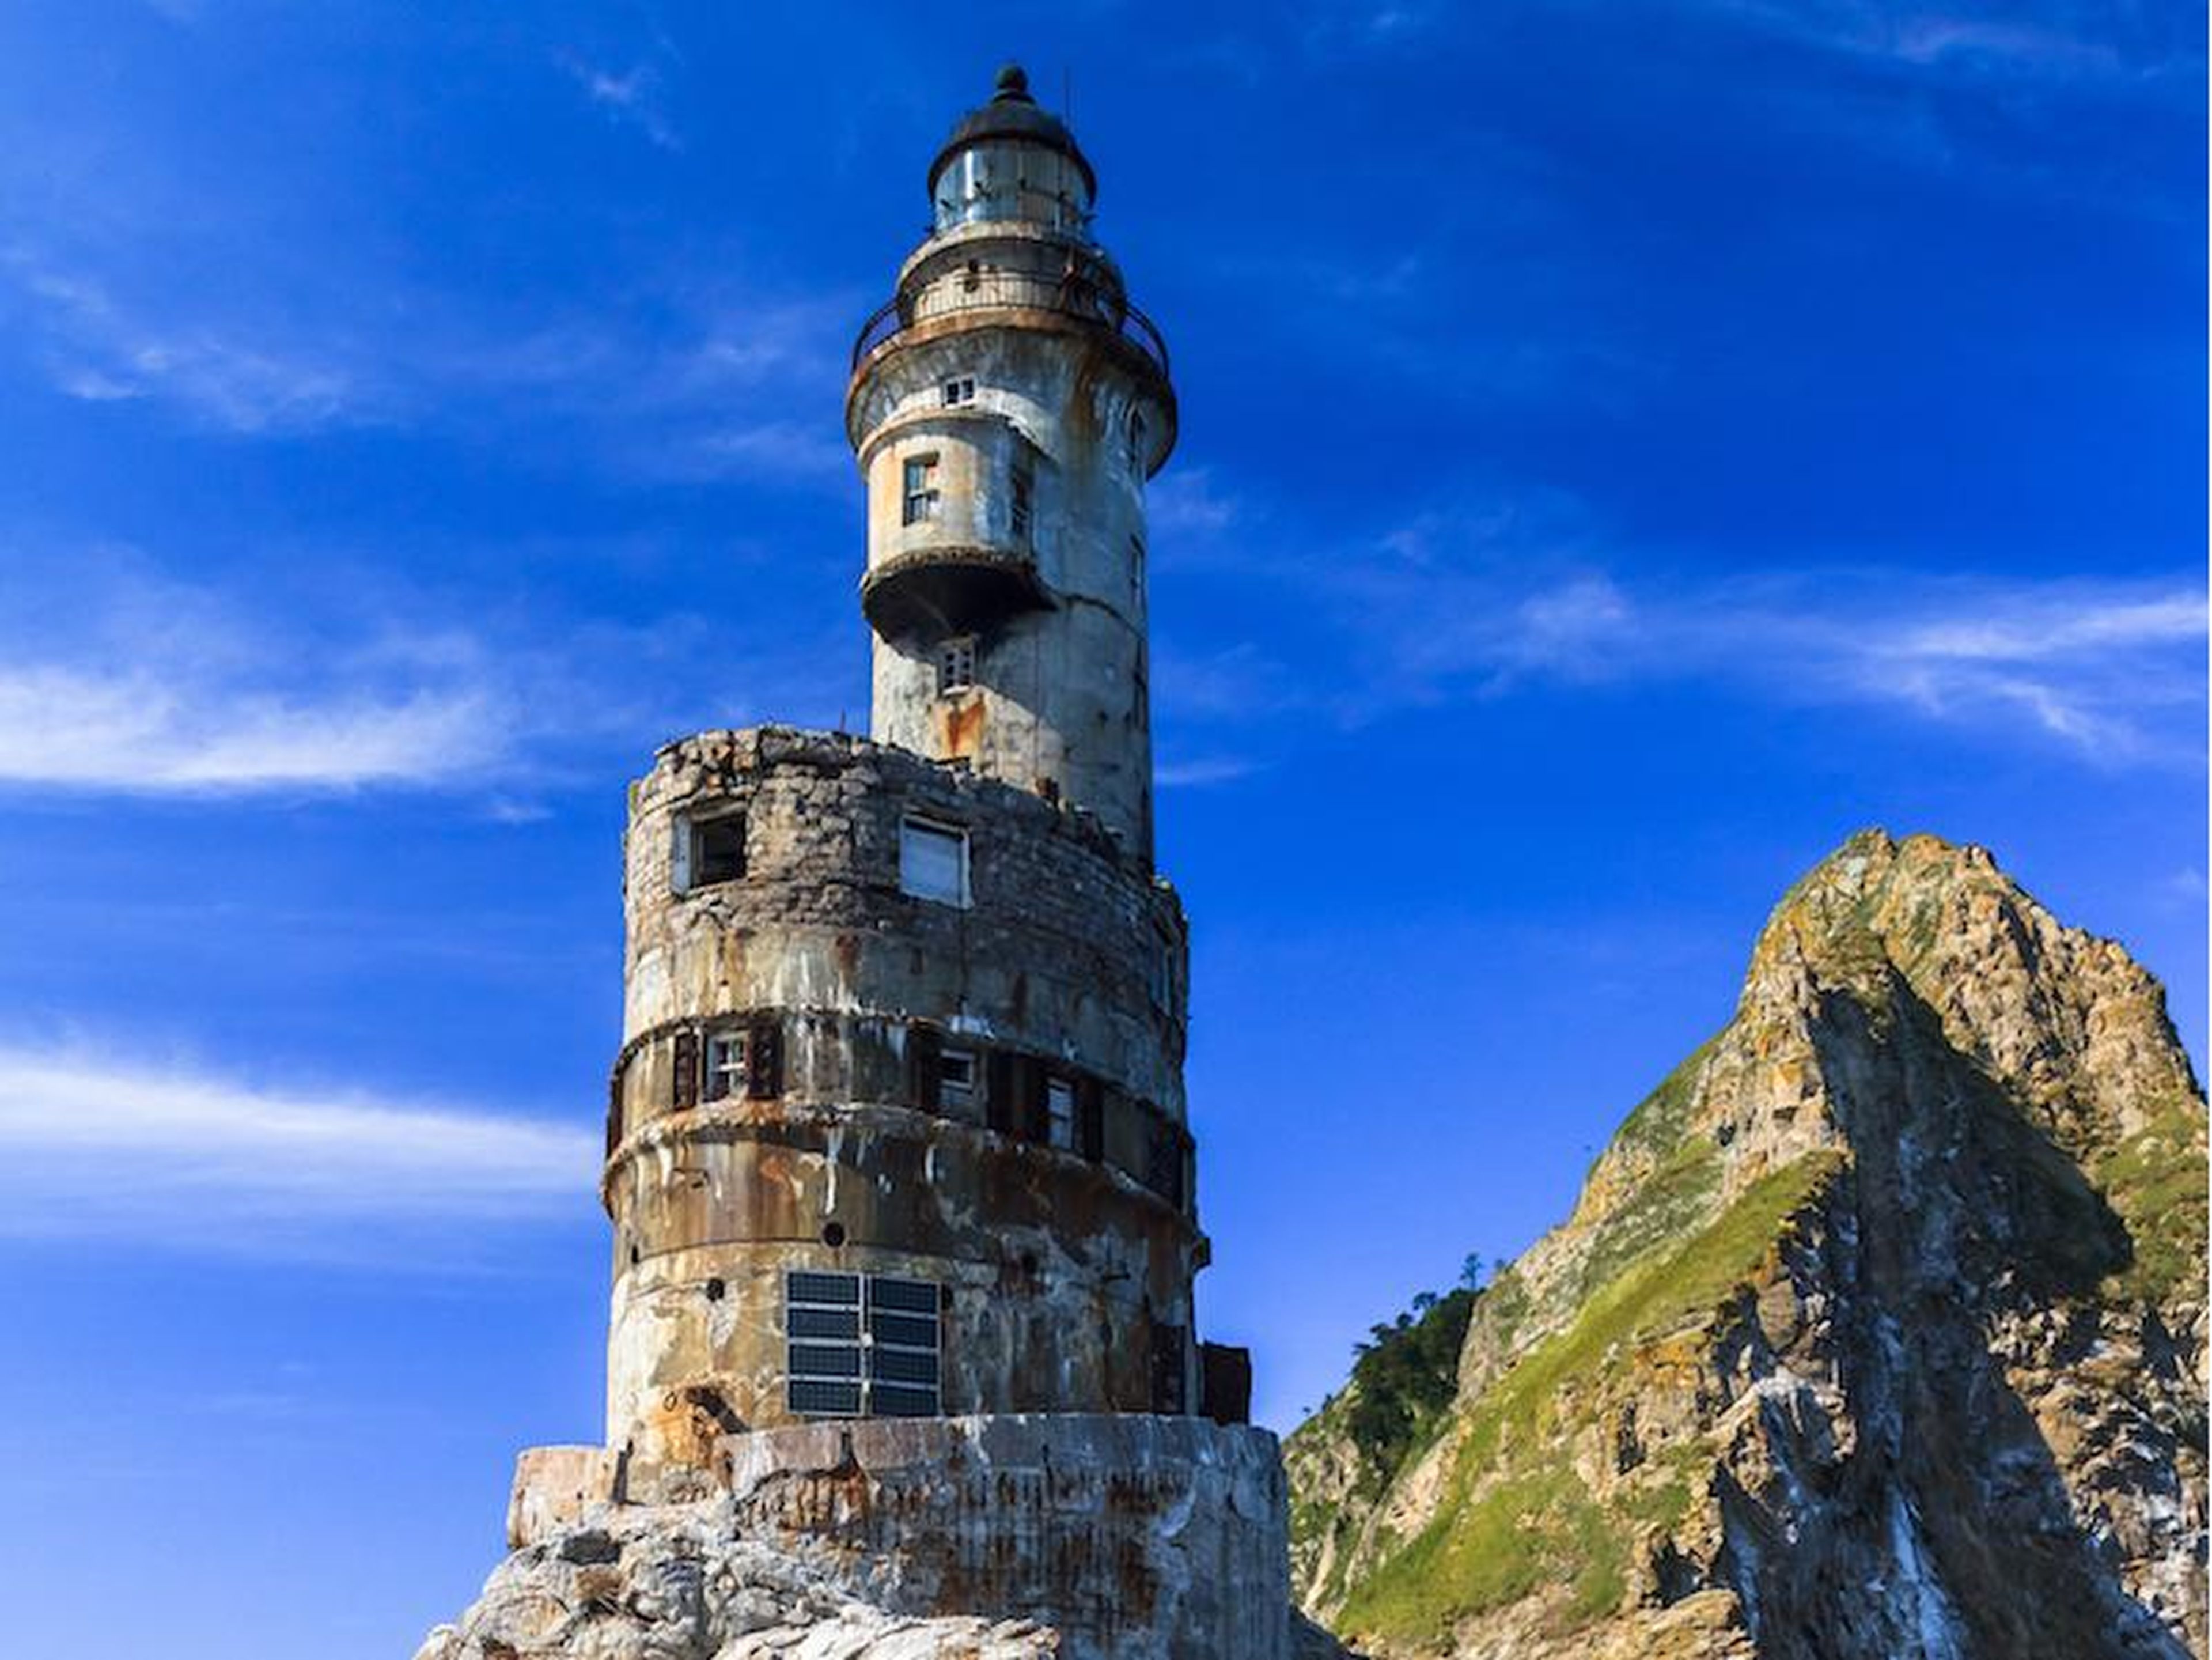 This lighthouse is located on an isolated island in Russia.